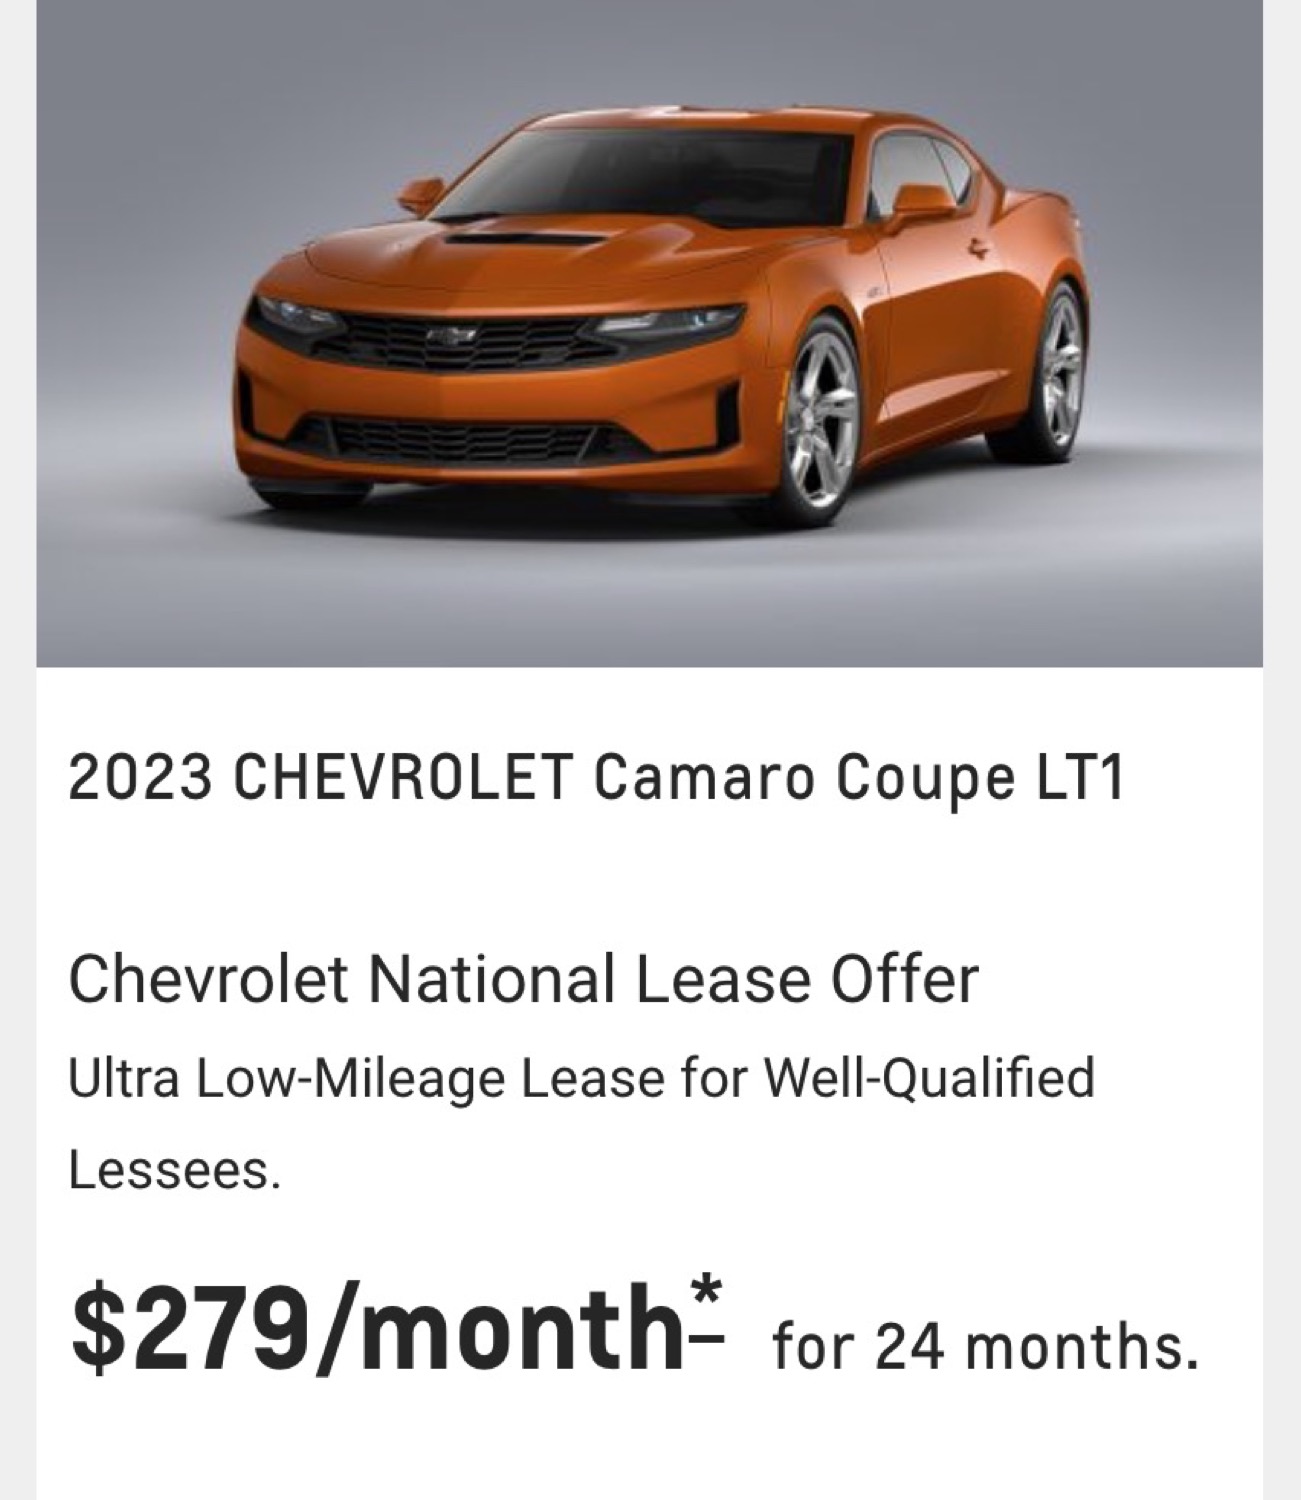 Chevy Camaro Discount Low-Interest Financing In January 2023